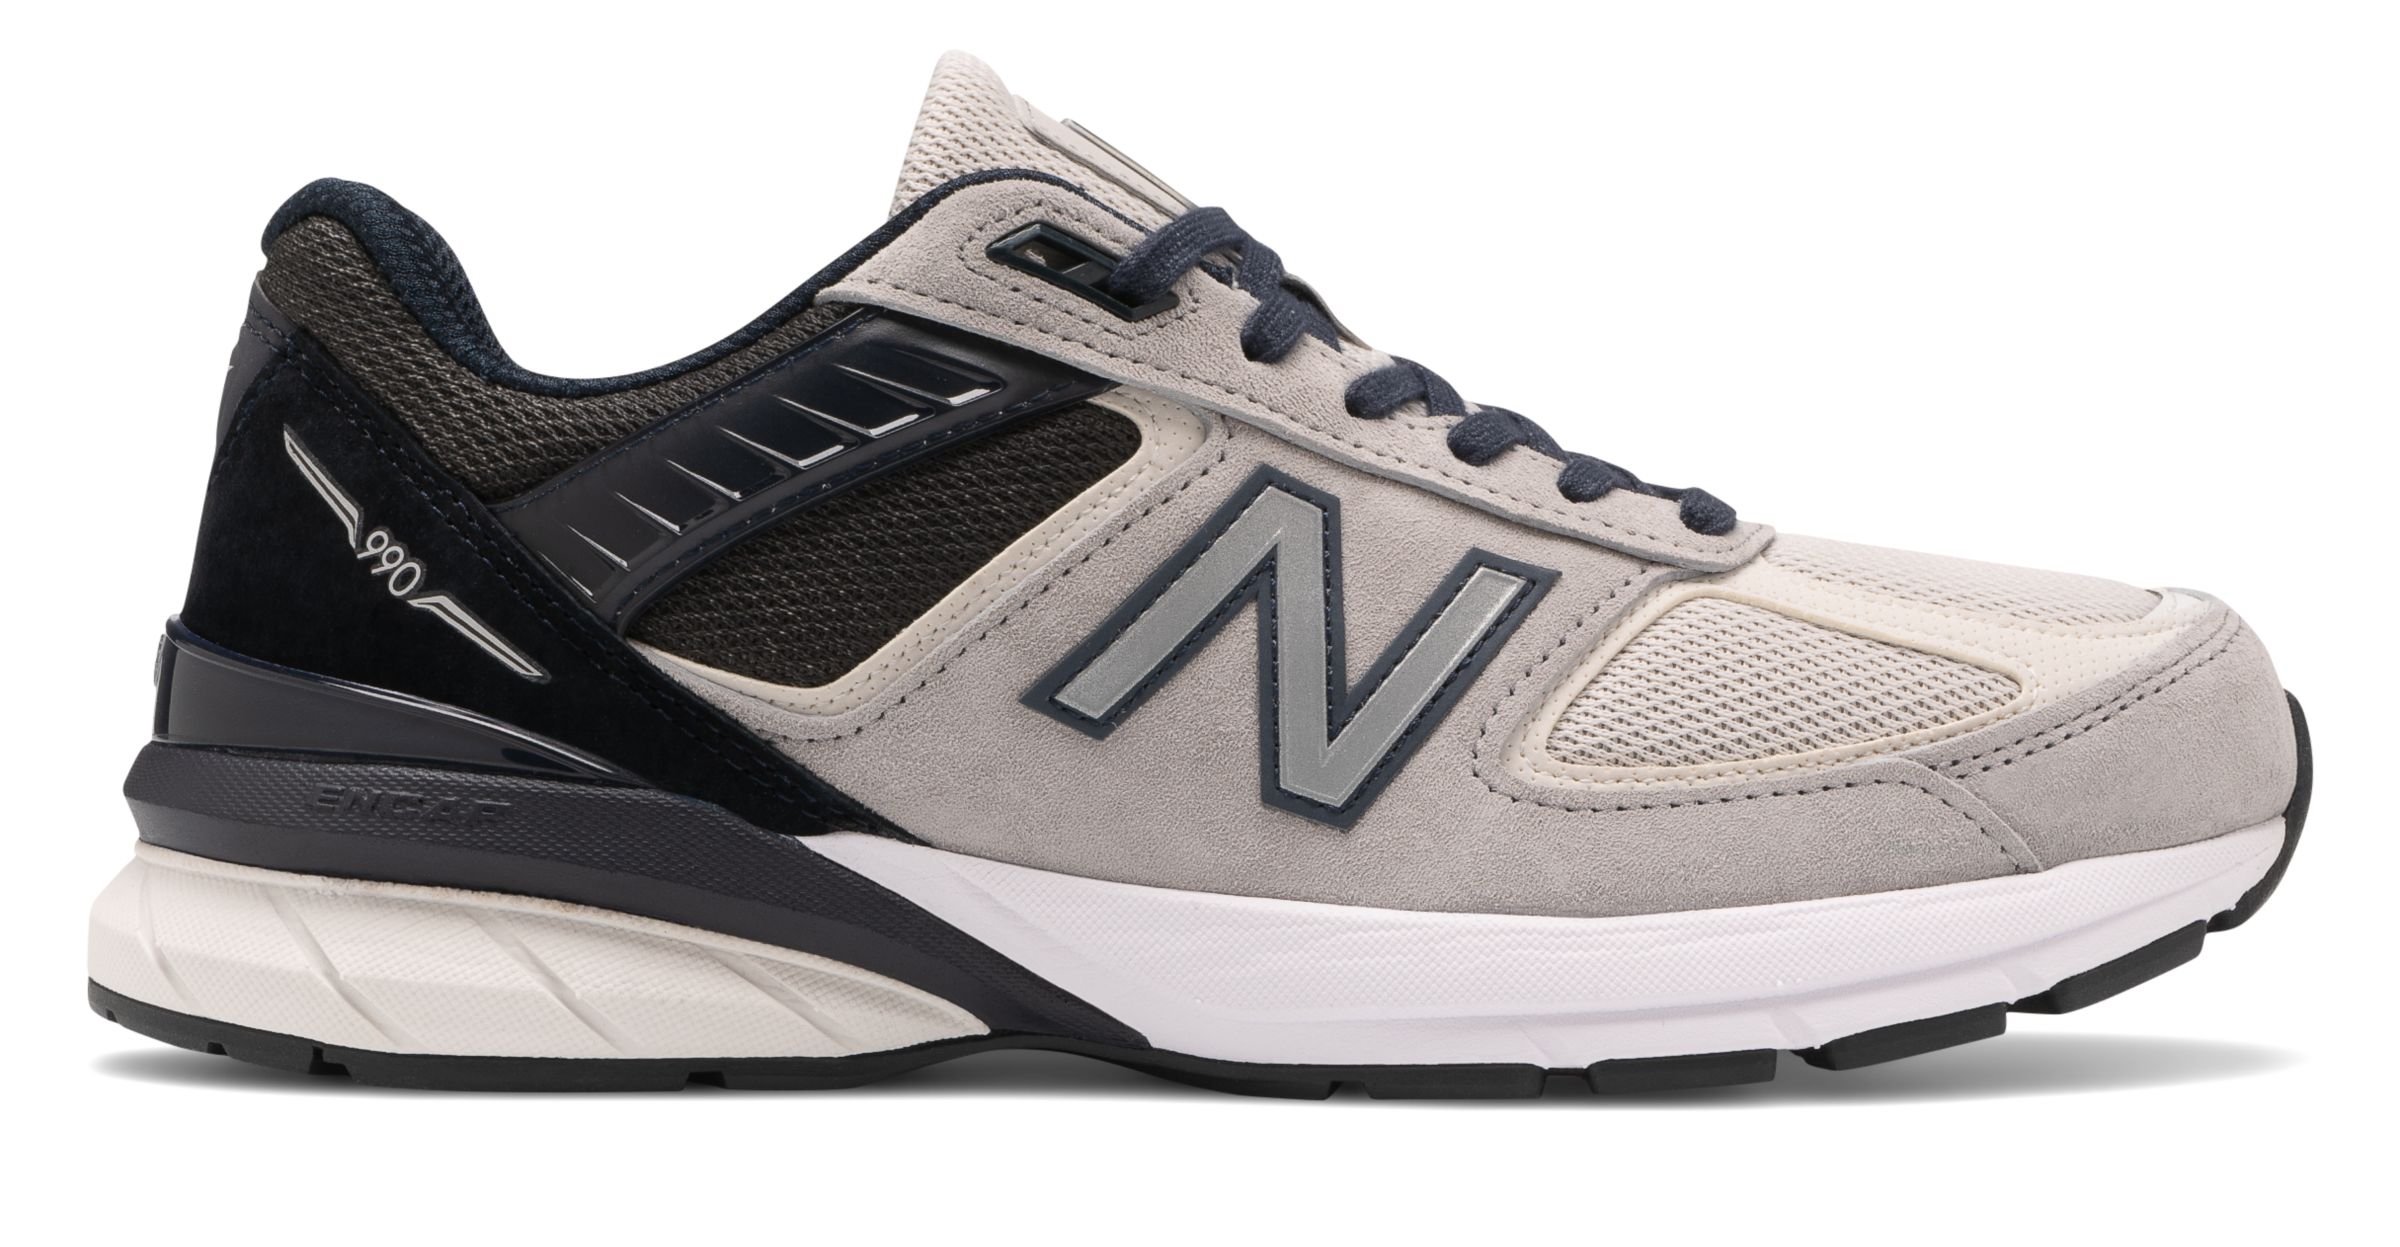 Men's Made in US 990v5 Shoes - New Balance